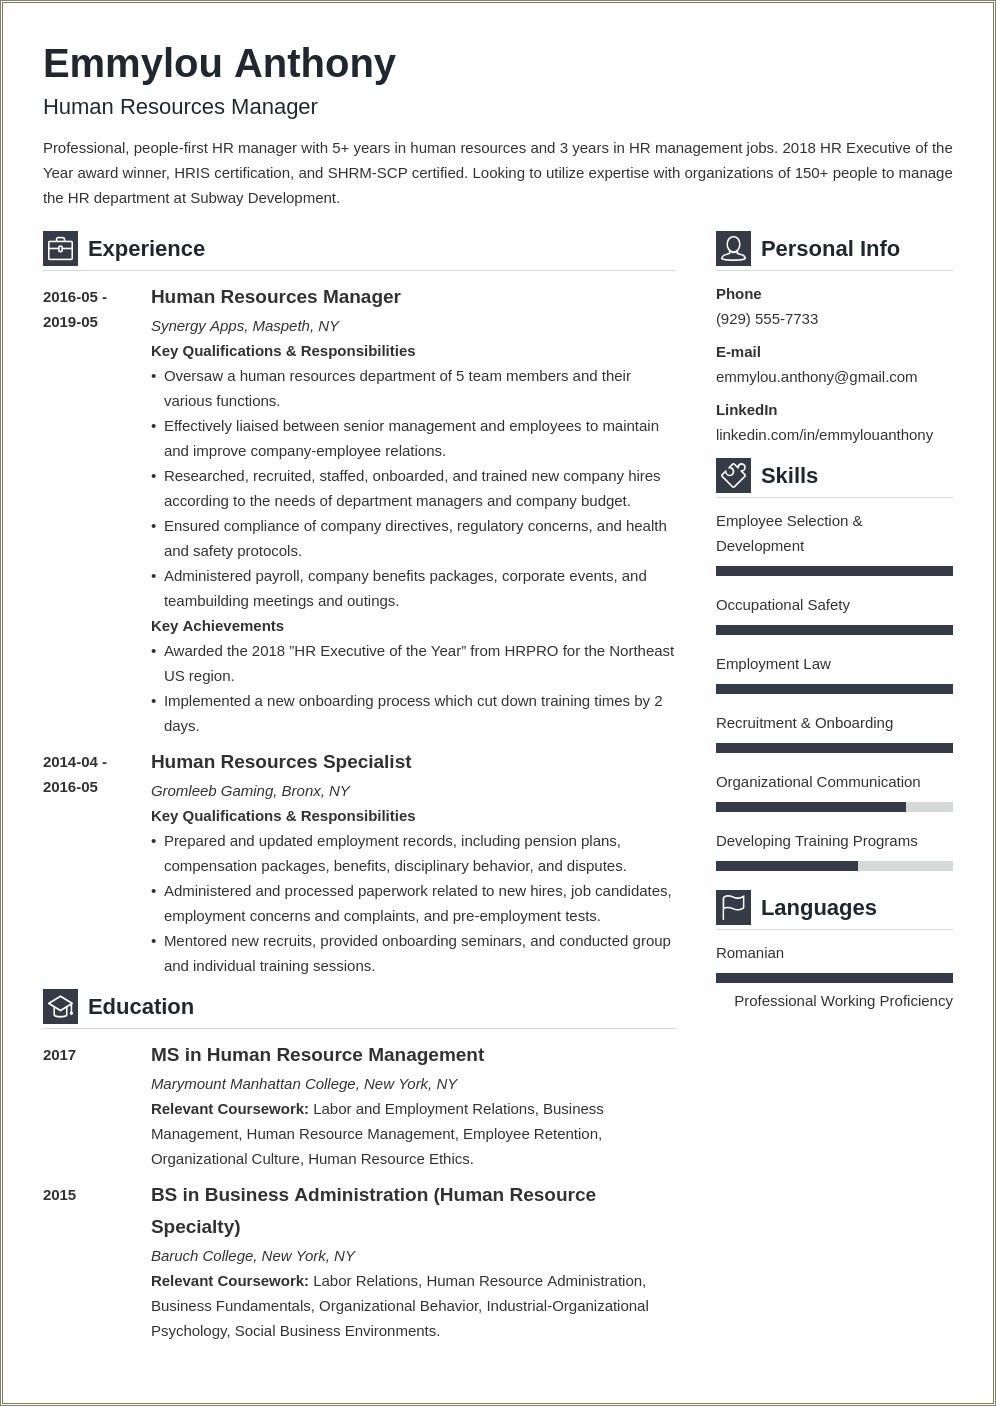 Human Resources Resume Samples Professional Summary